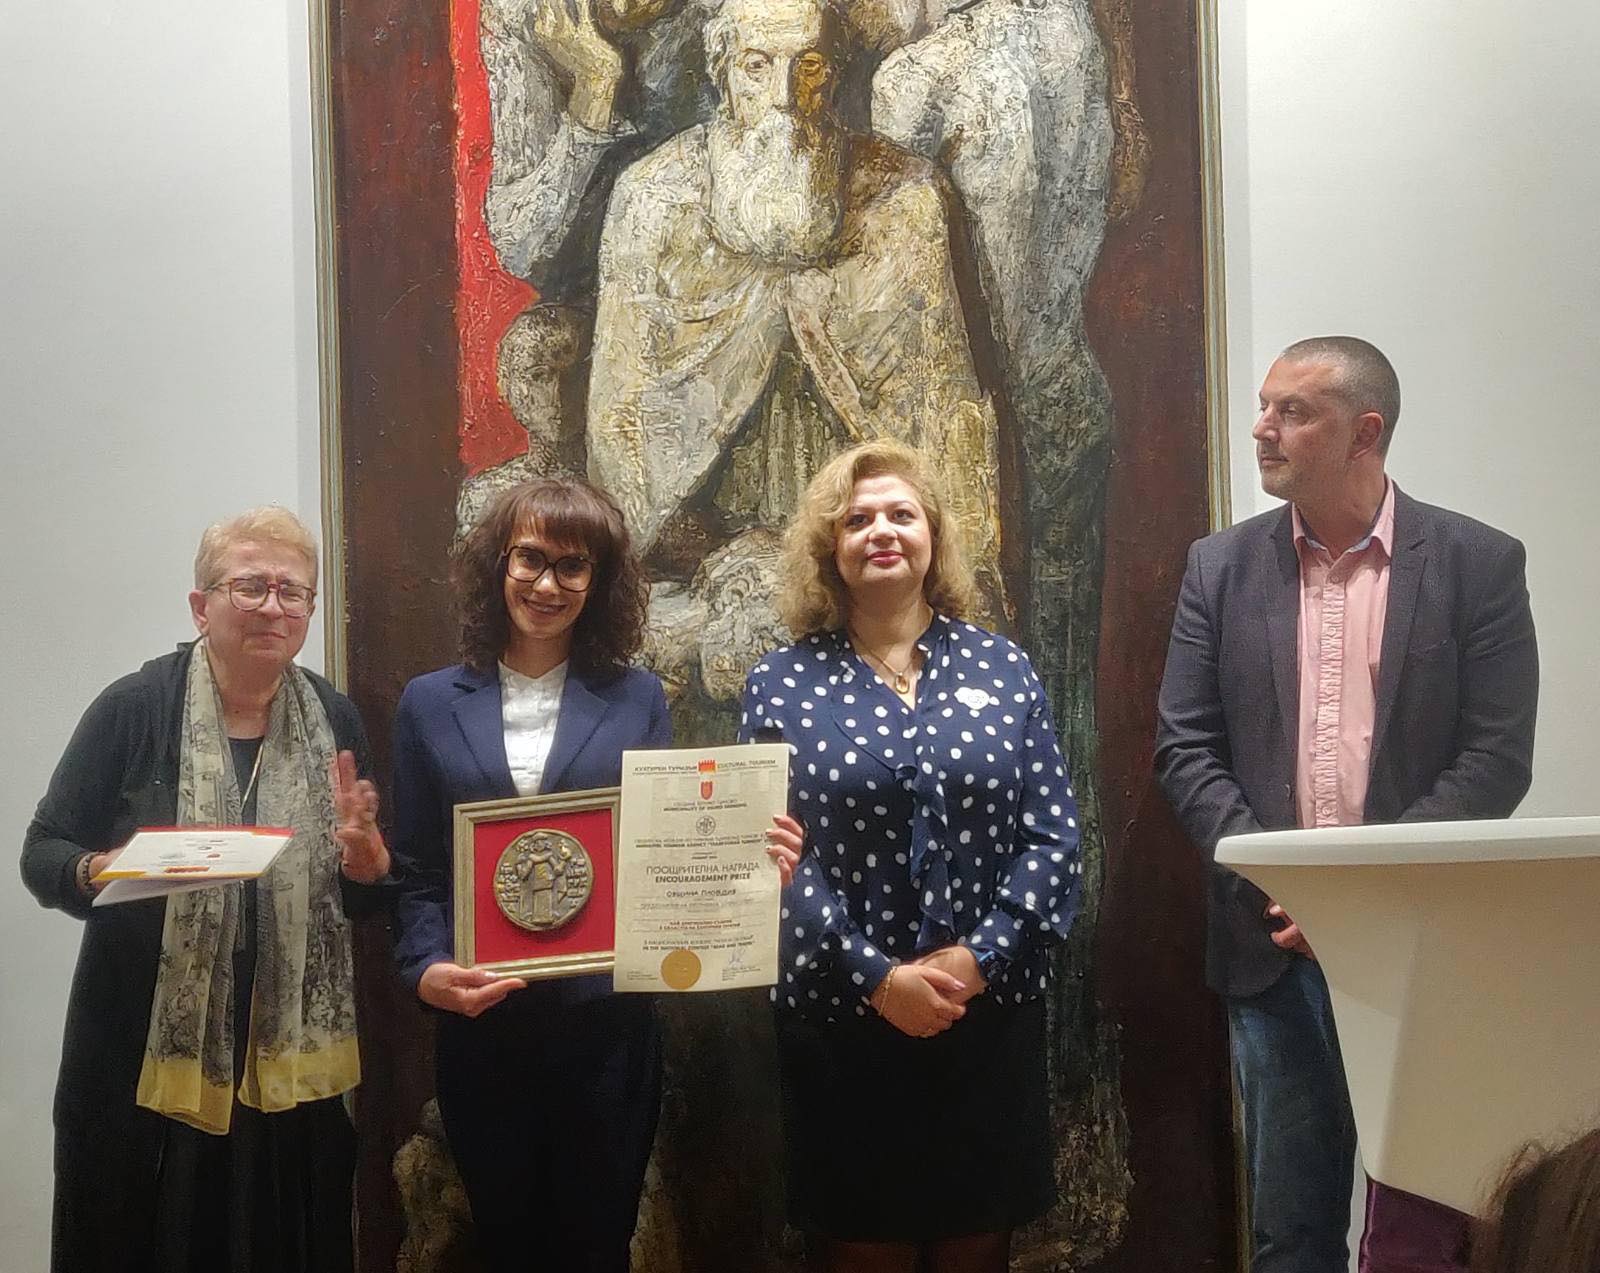 Municipality of Plovdiv with two awards from the Exhibition "Cultural Tourism"